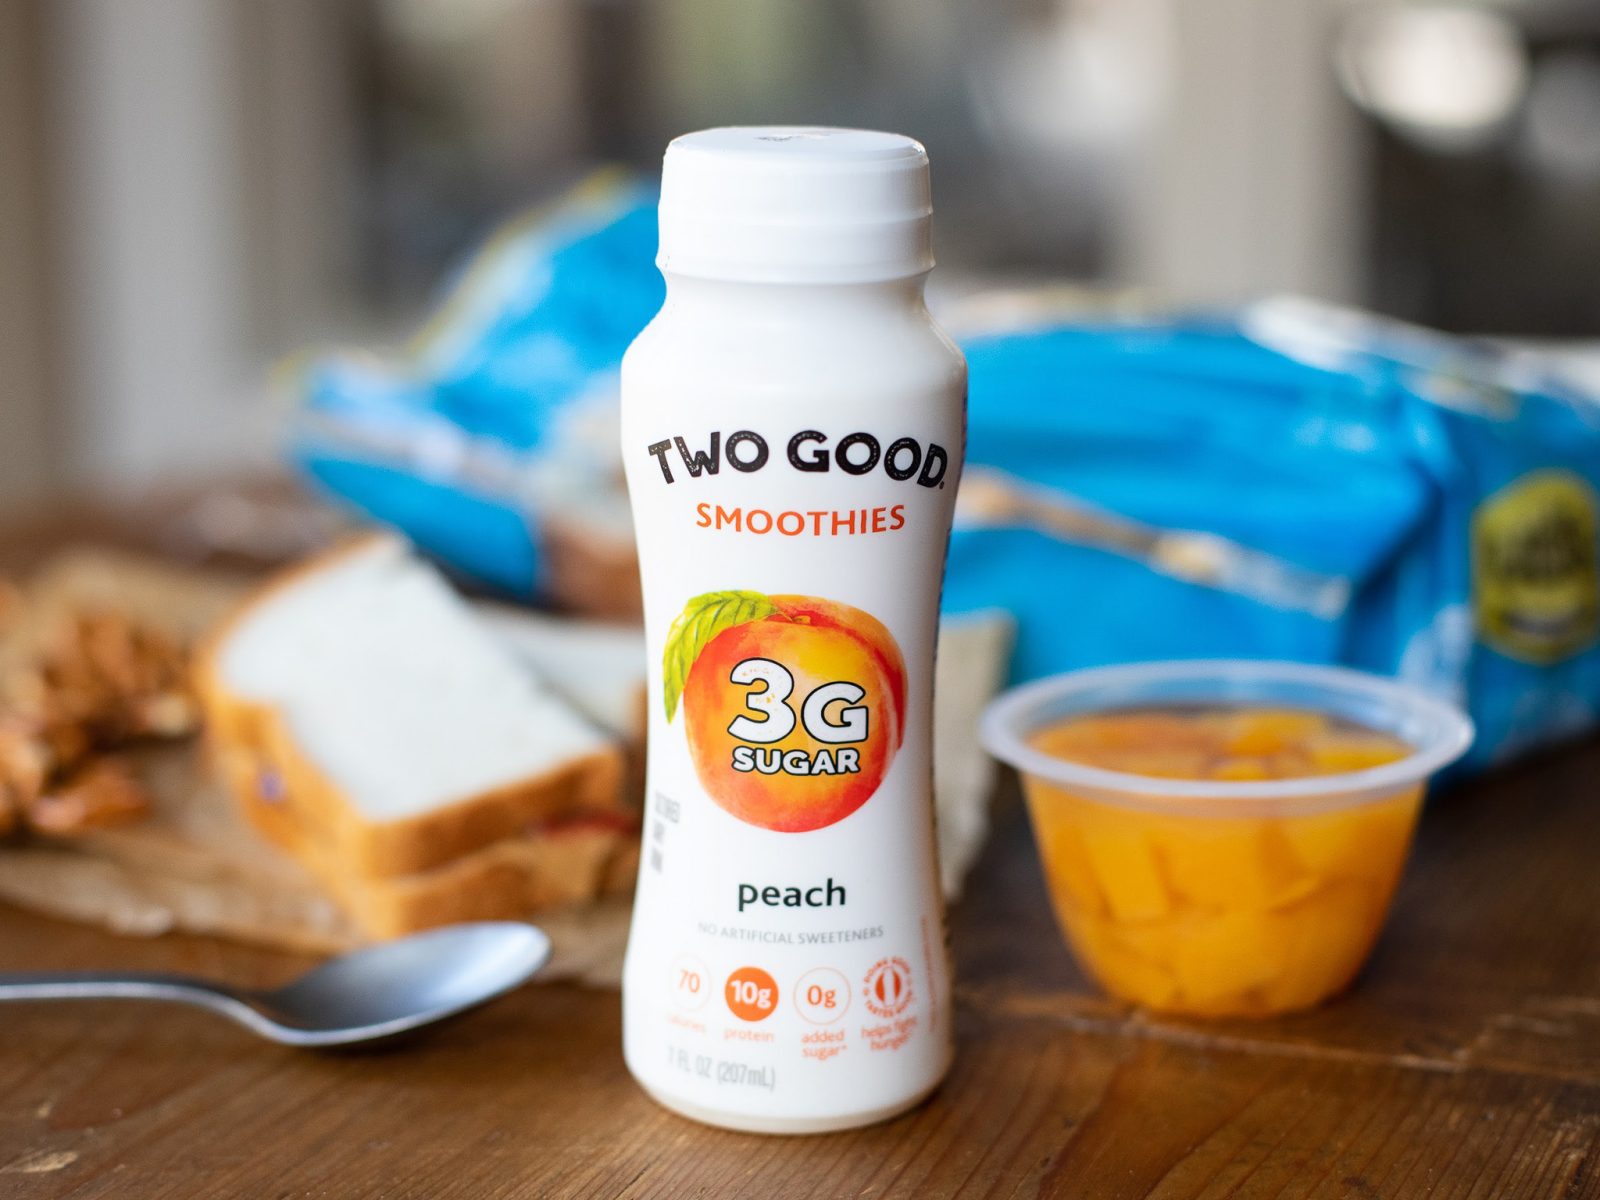 Get Two Good Smoothies For As Low As 64¢ At Kroger